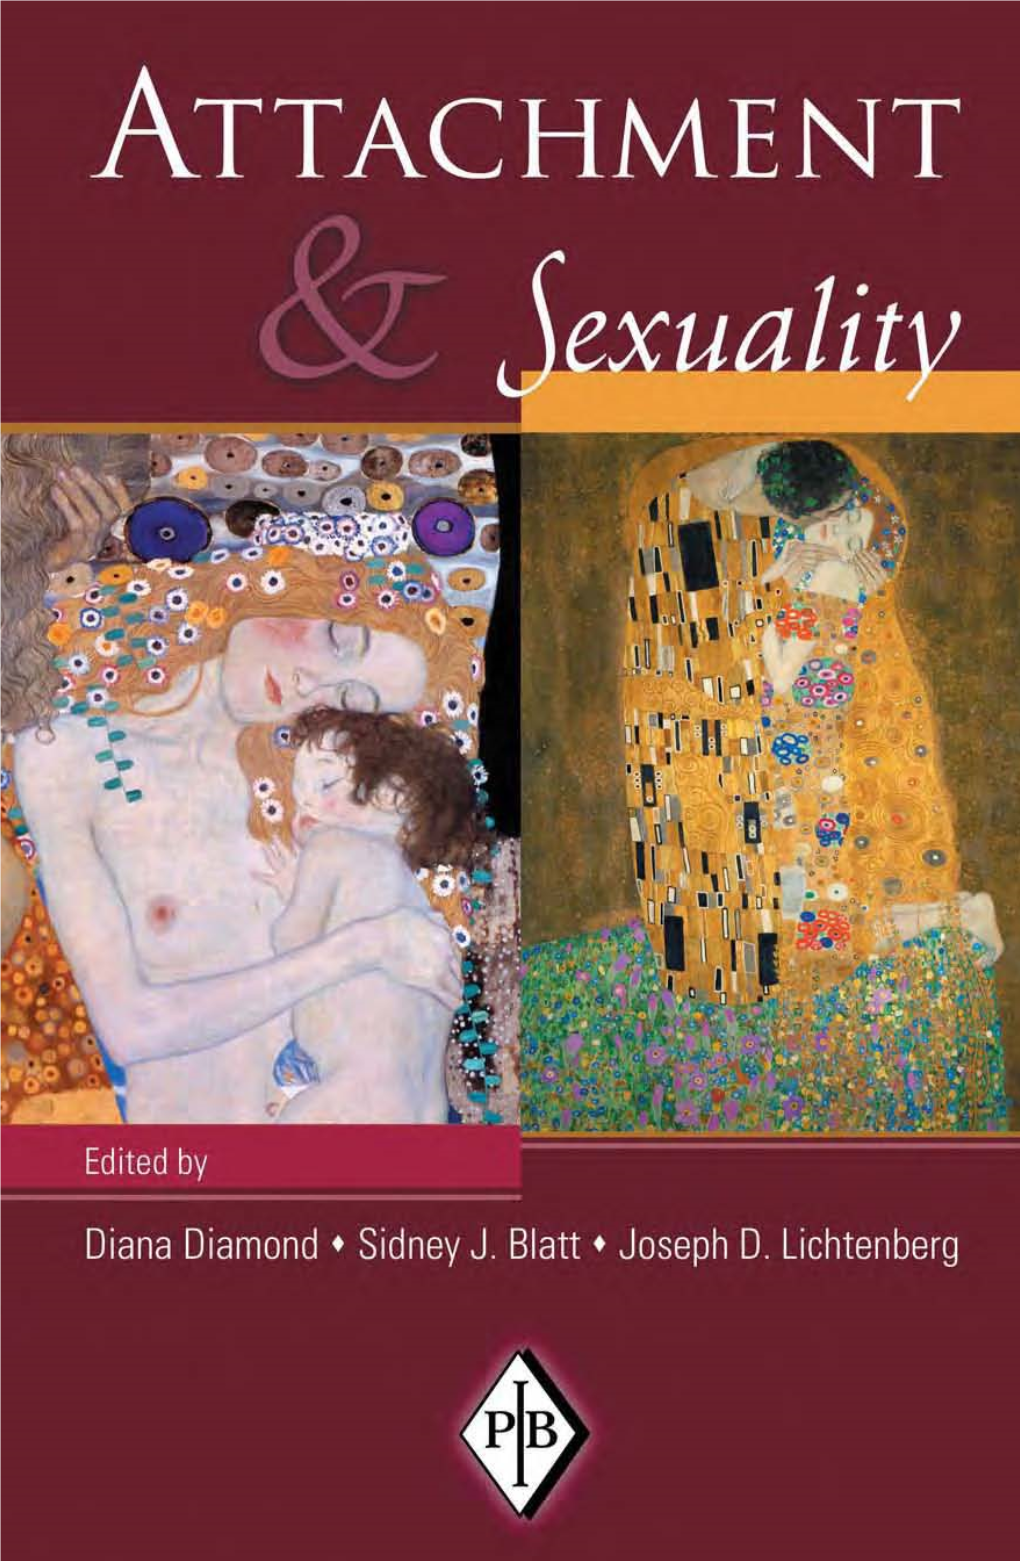 Attachment and Sexuality.Pdf